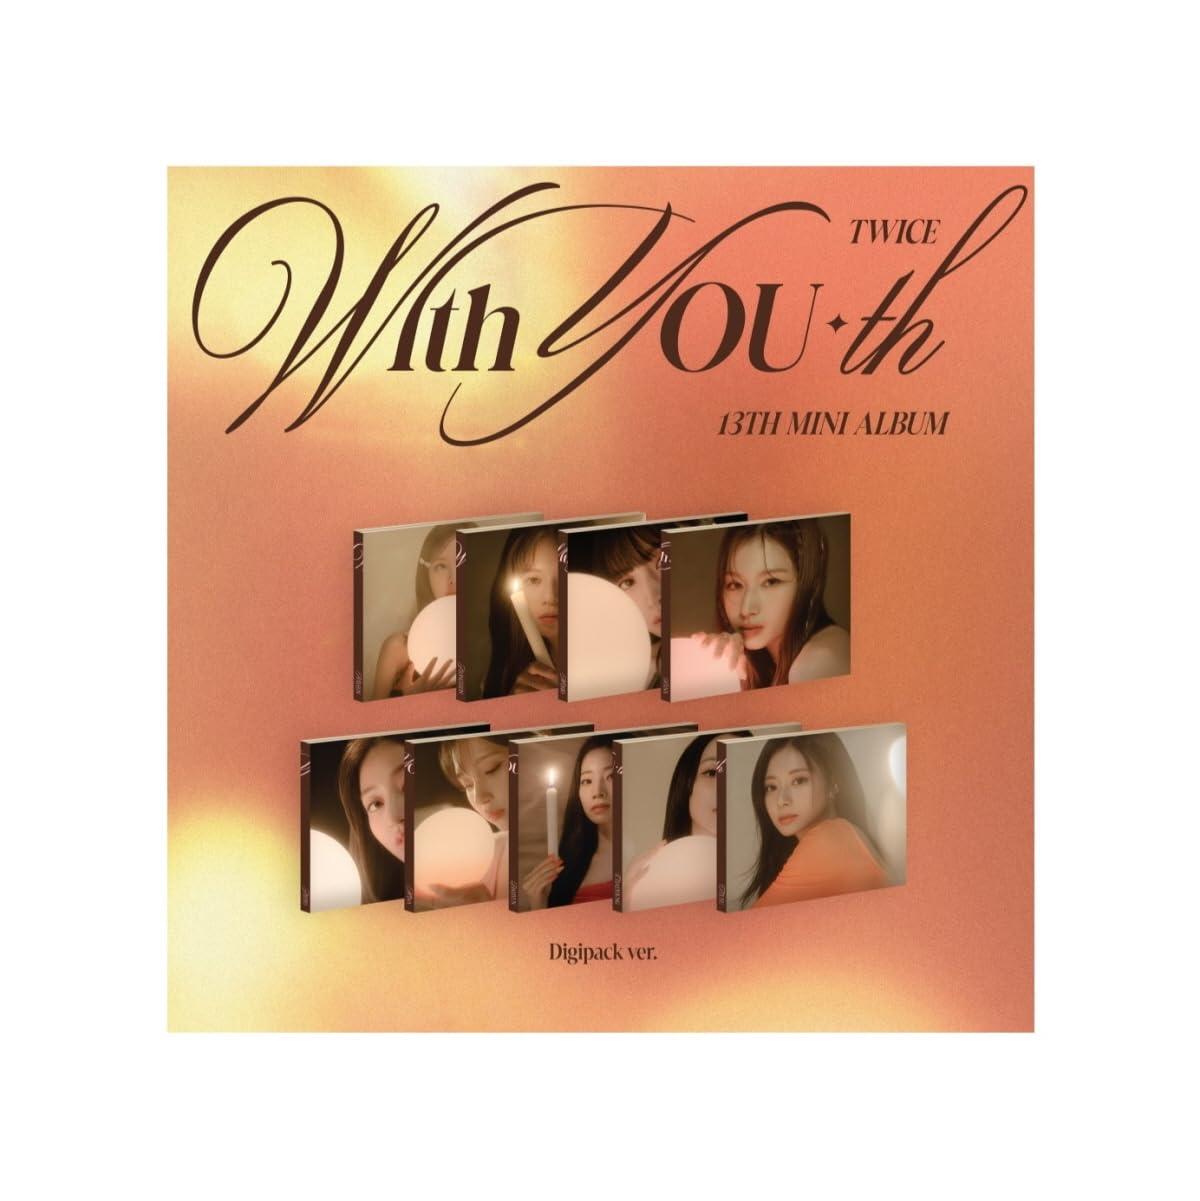 TWICE - With YOU-th [Digipack Ver.] 13th Mini Album+Pre-Order Benefit (TZUYU ver.)